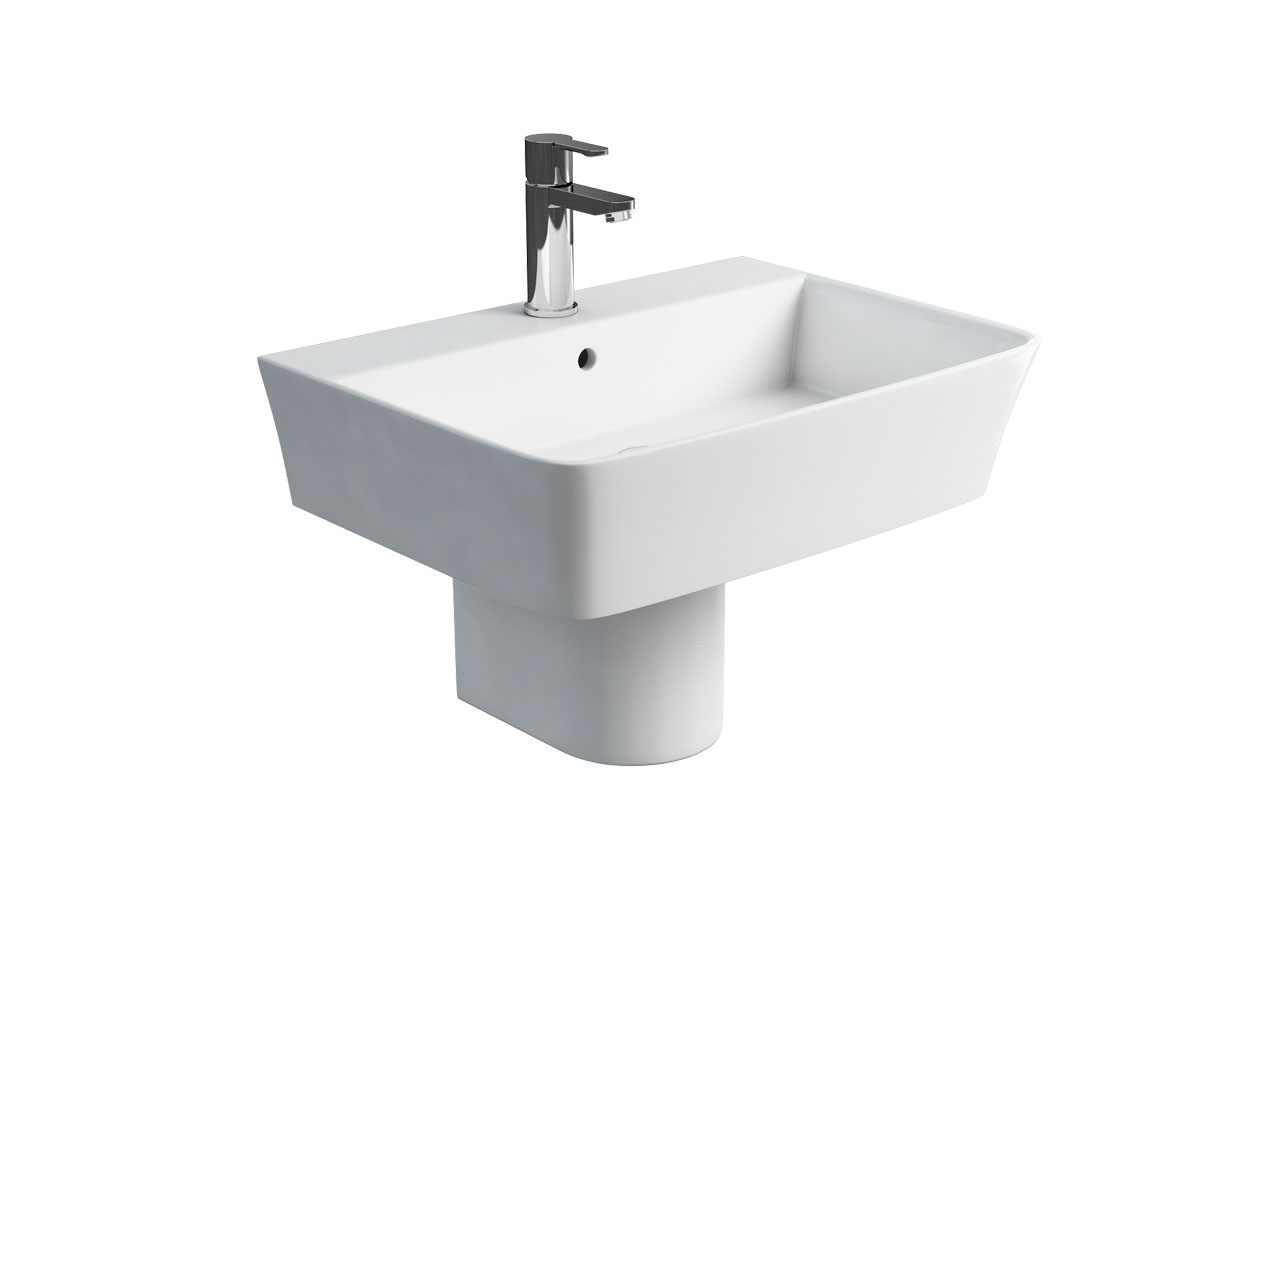 Fine S40 600 basin and round fronted semi pedestal